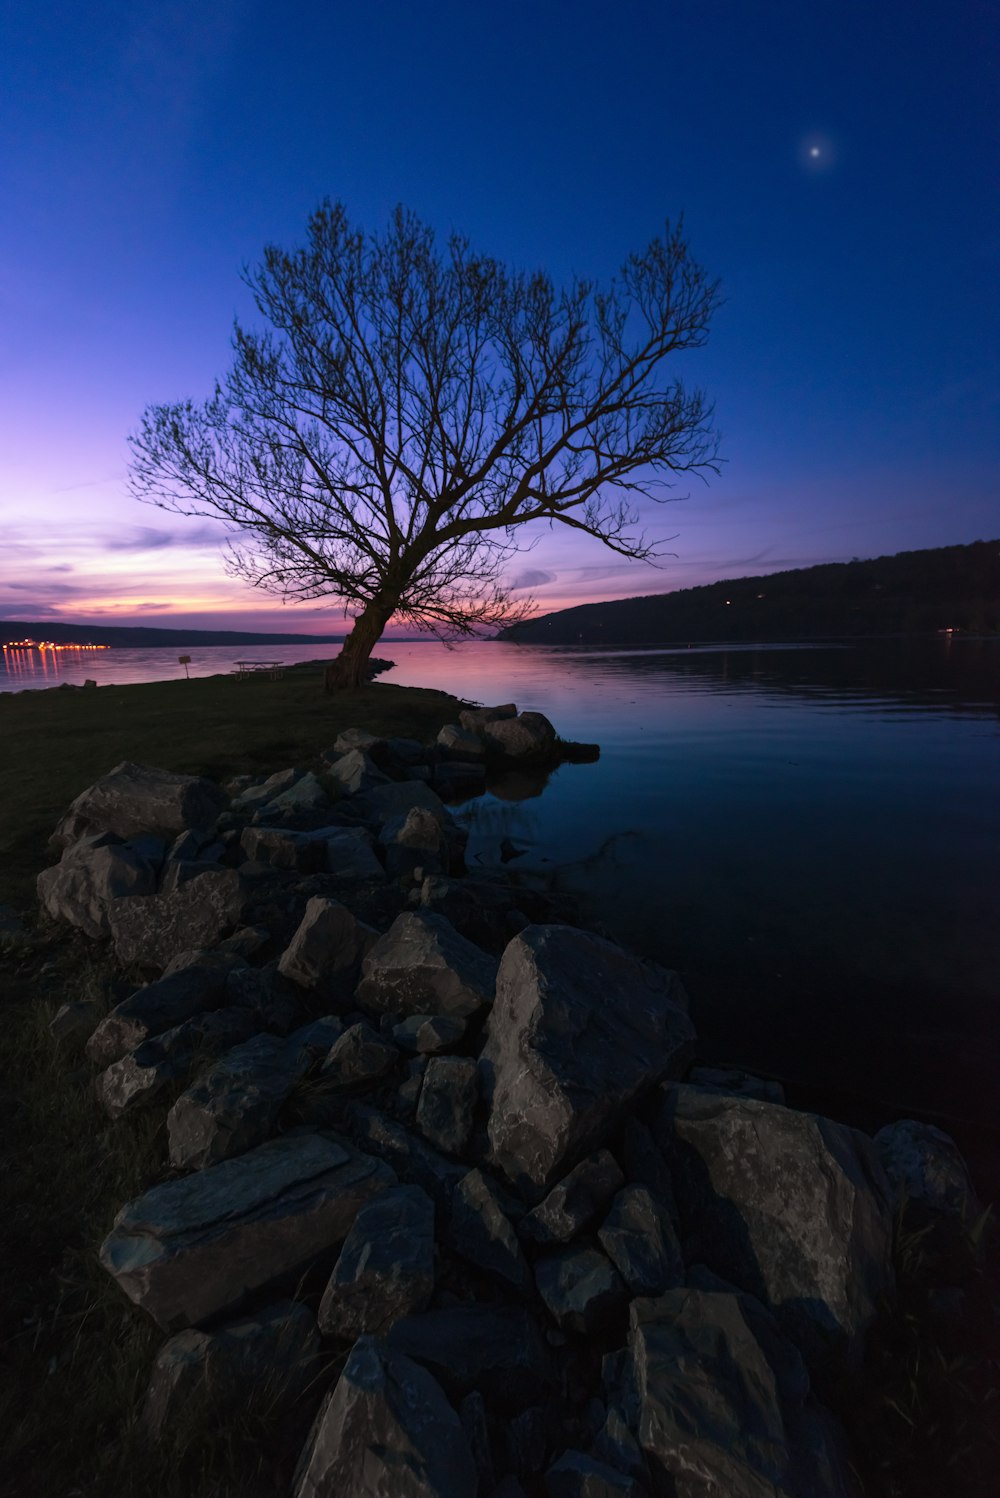 a lone tree sitting on the edge of a body of water